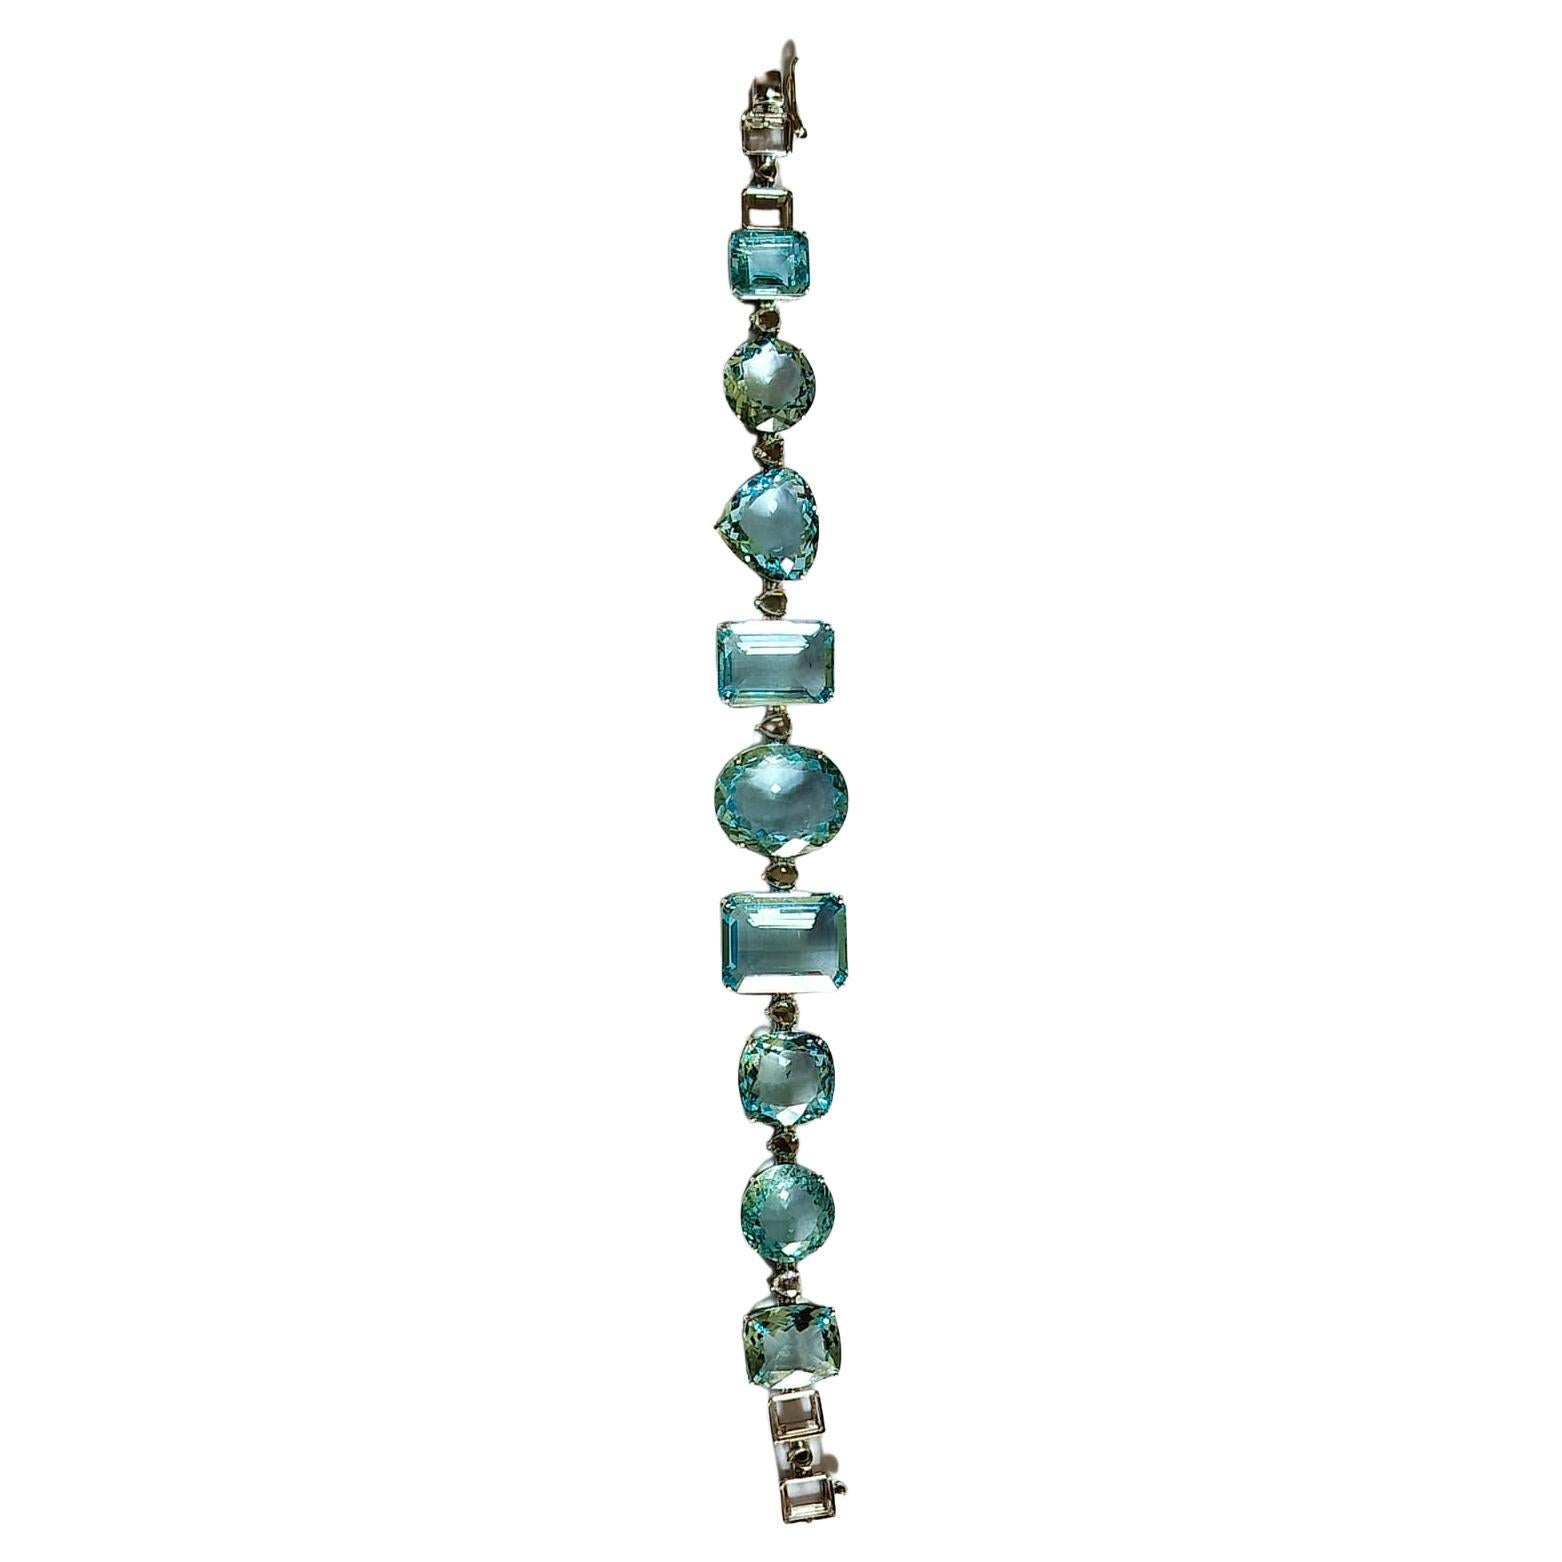 A very gorgeous, fun yet classic Aquamarine Tennis Bracelet set in 18K Gold & Diamonds. The weight of the Mixed shaped Aquamarine is 57.57 carats. The Aquamarine are completely natural, without any treatment . The weight of the Diamonds is 0.8